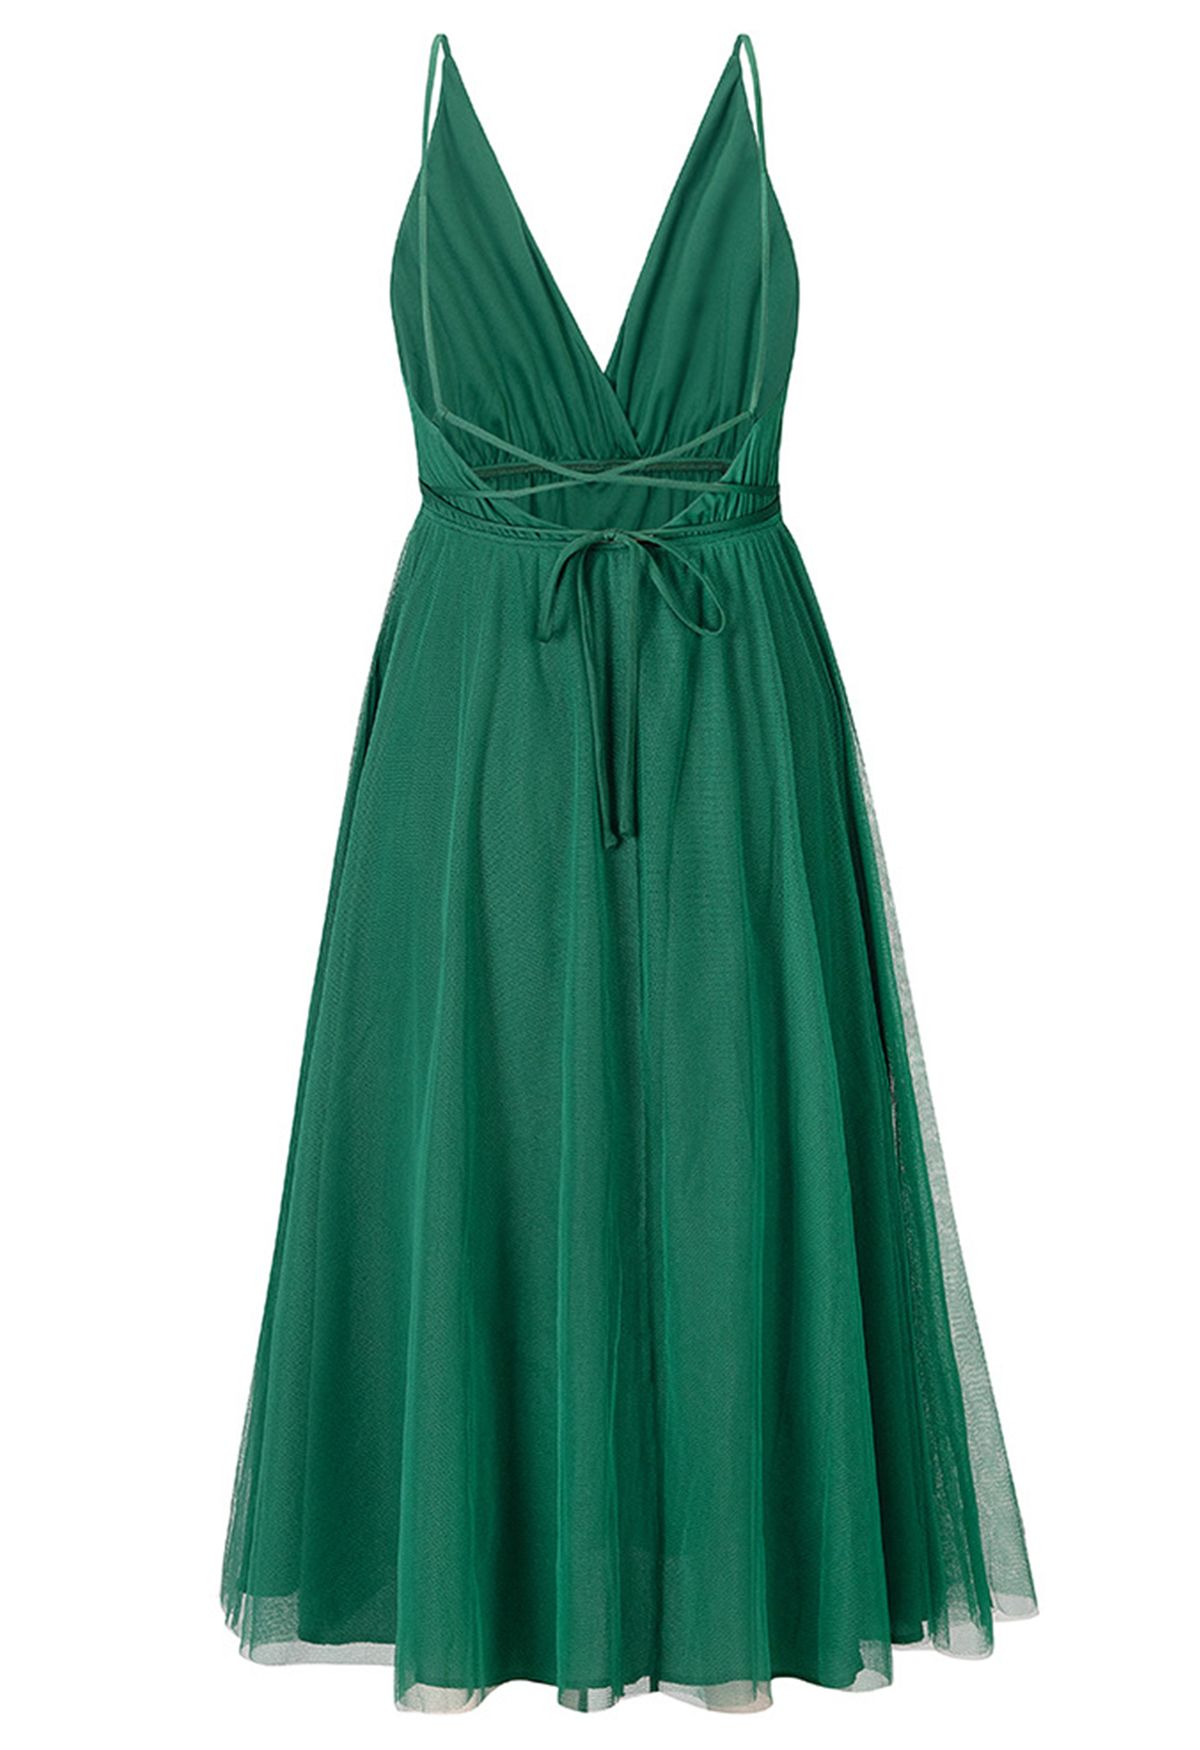 Crisscross Open Back Wrap Mesh Tulle Dress in Green - Retro, Indie and ...